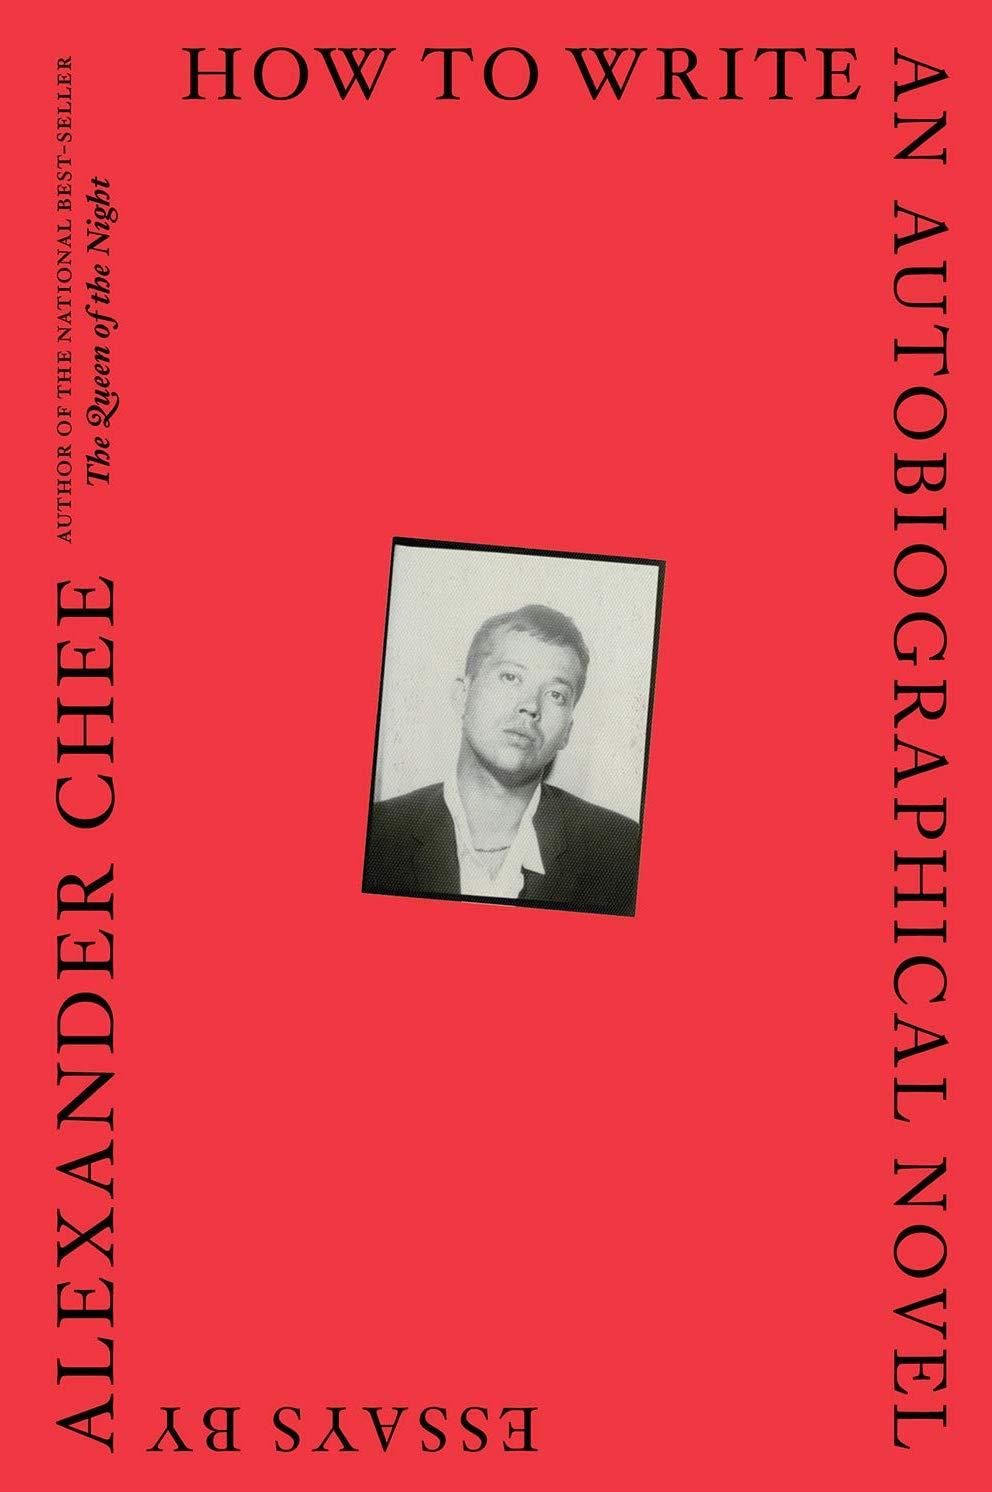 1. How to Write an Autobiographical Novel by Alexander Chee